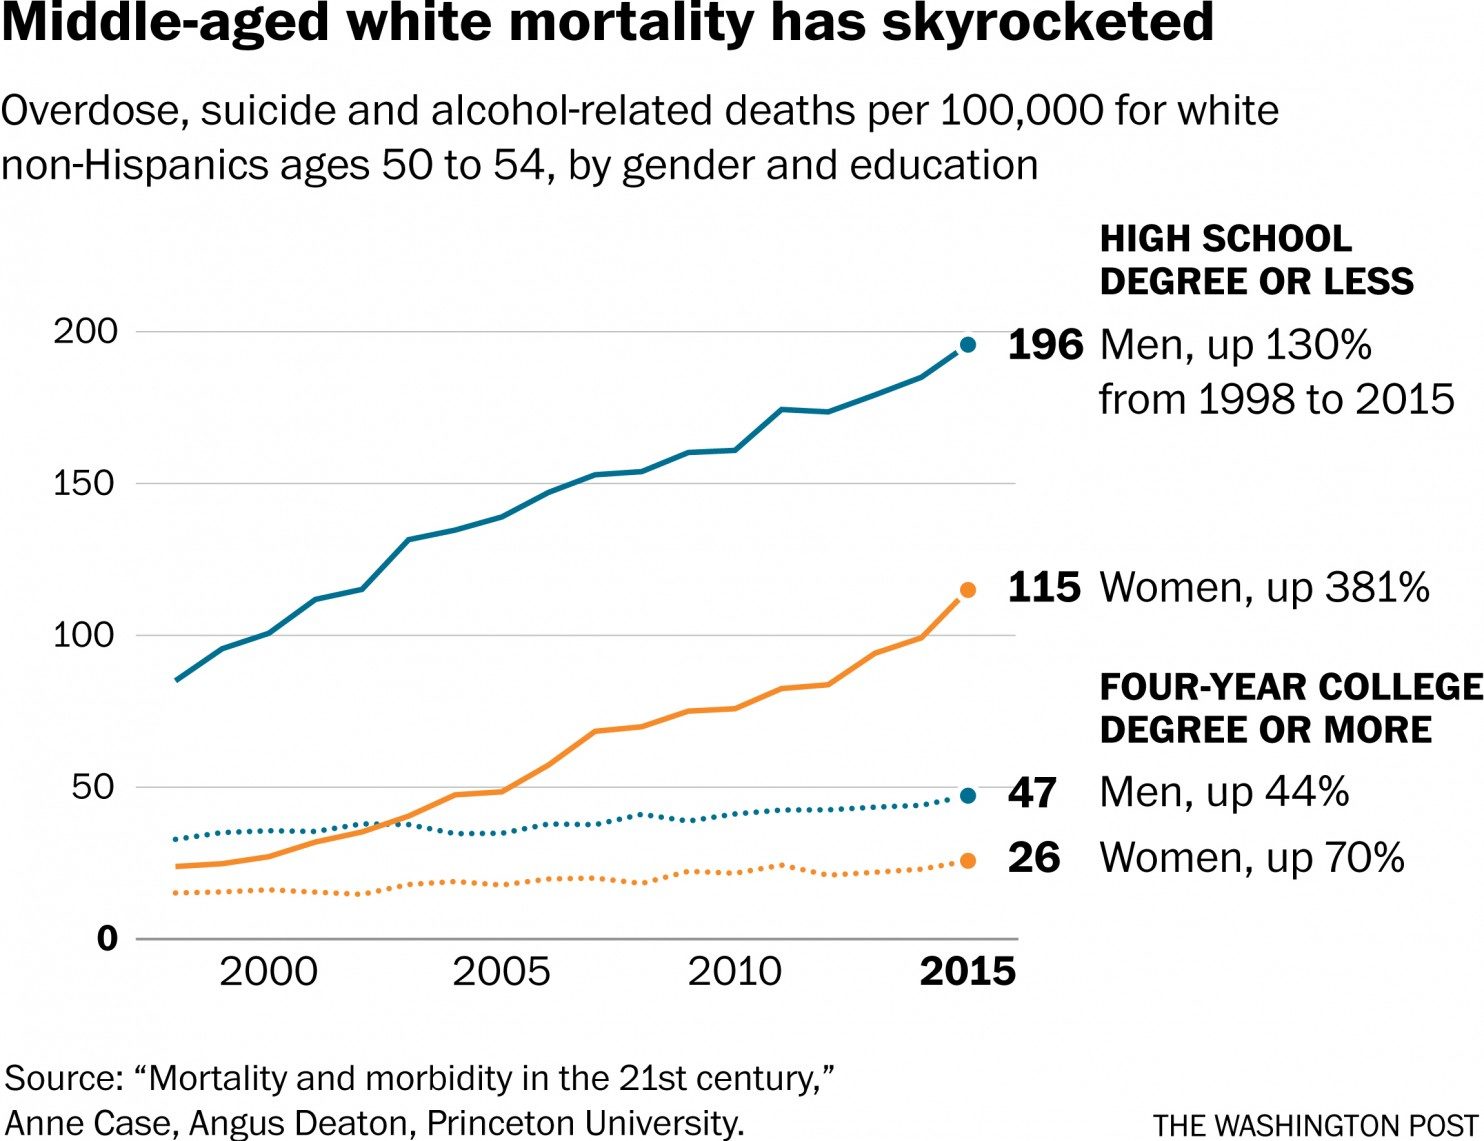 mortality rate